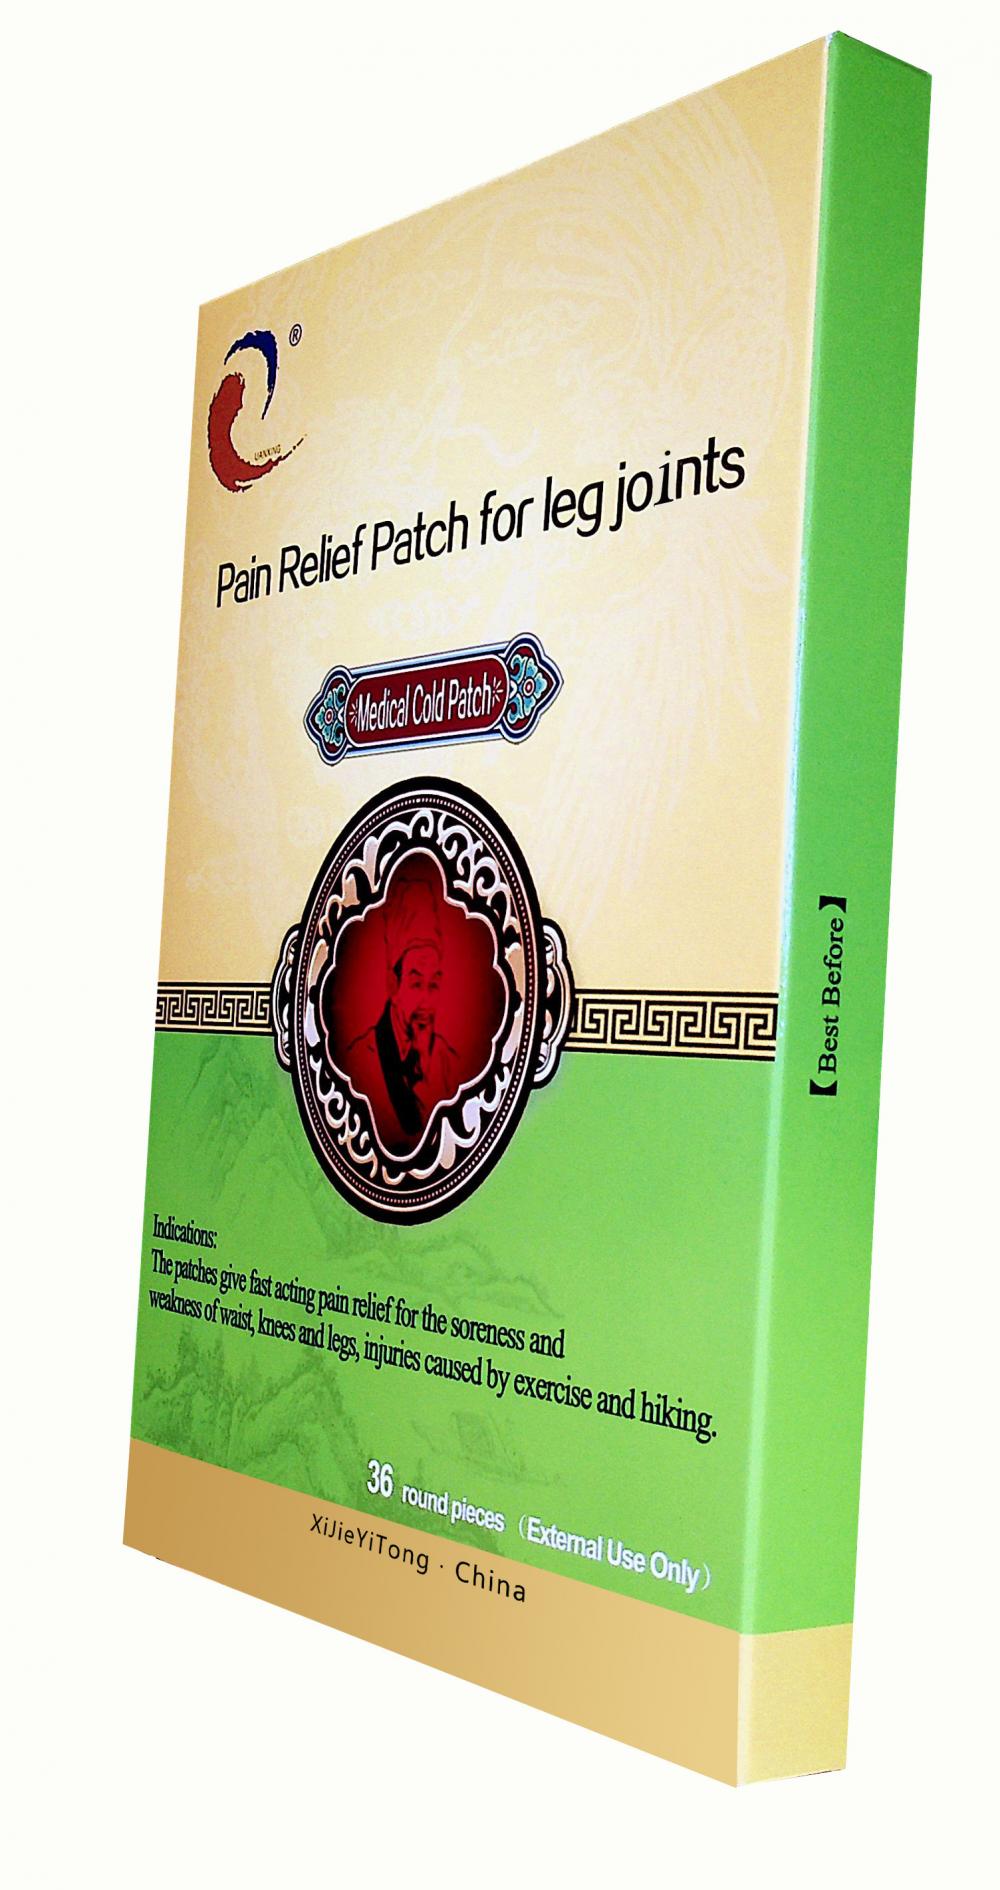 Pain Relief Patch for leg joints